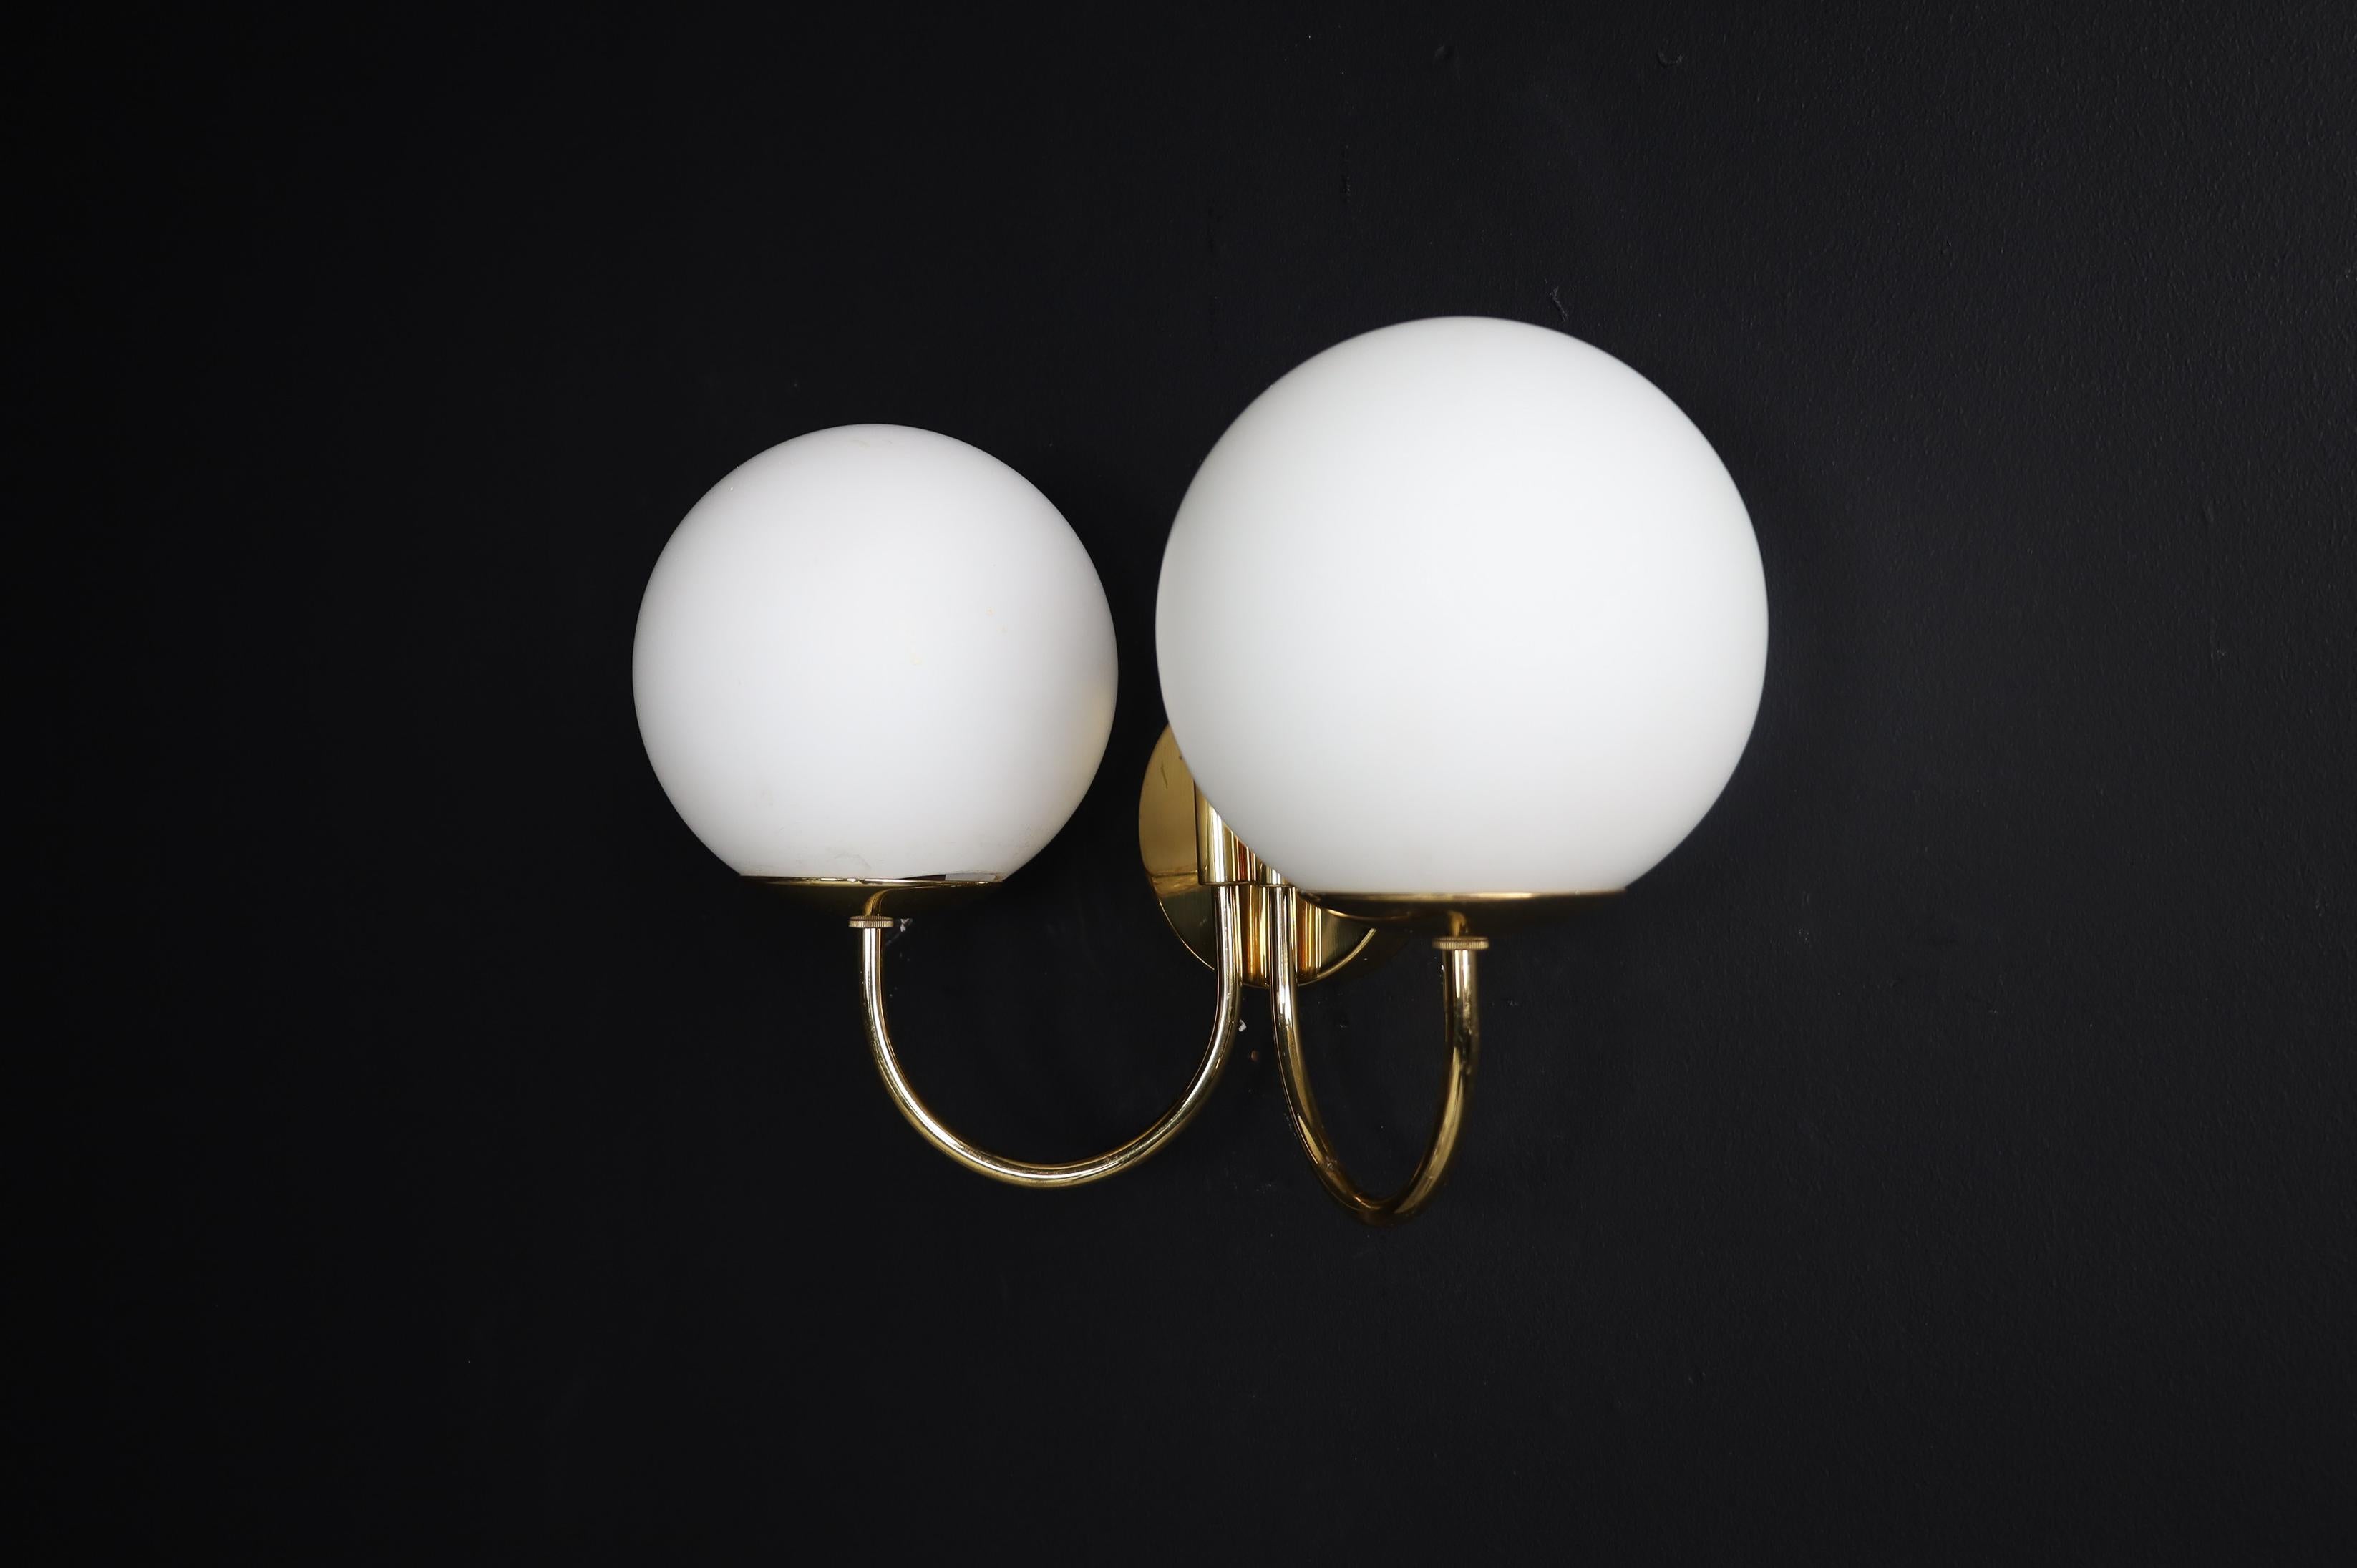 Elegant Sconces with Brass Fixtures and Opaline Glass Globes, Italy, 1960s For Sale 2